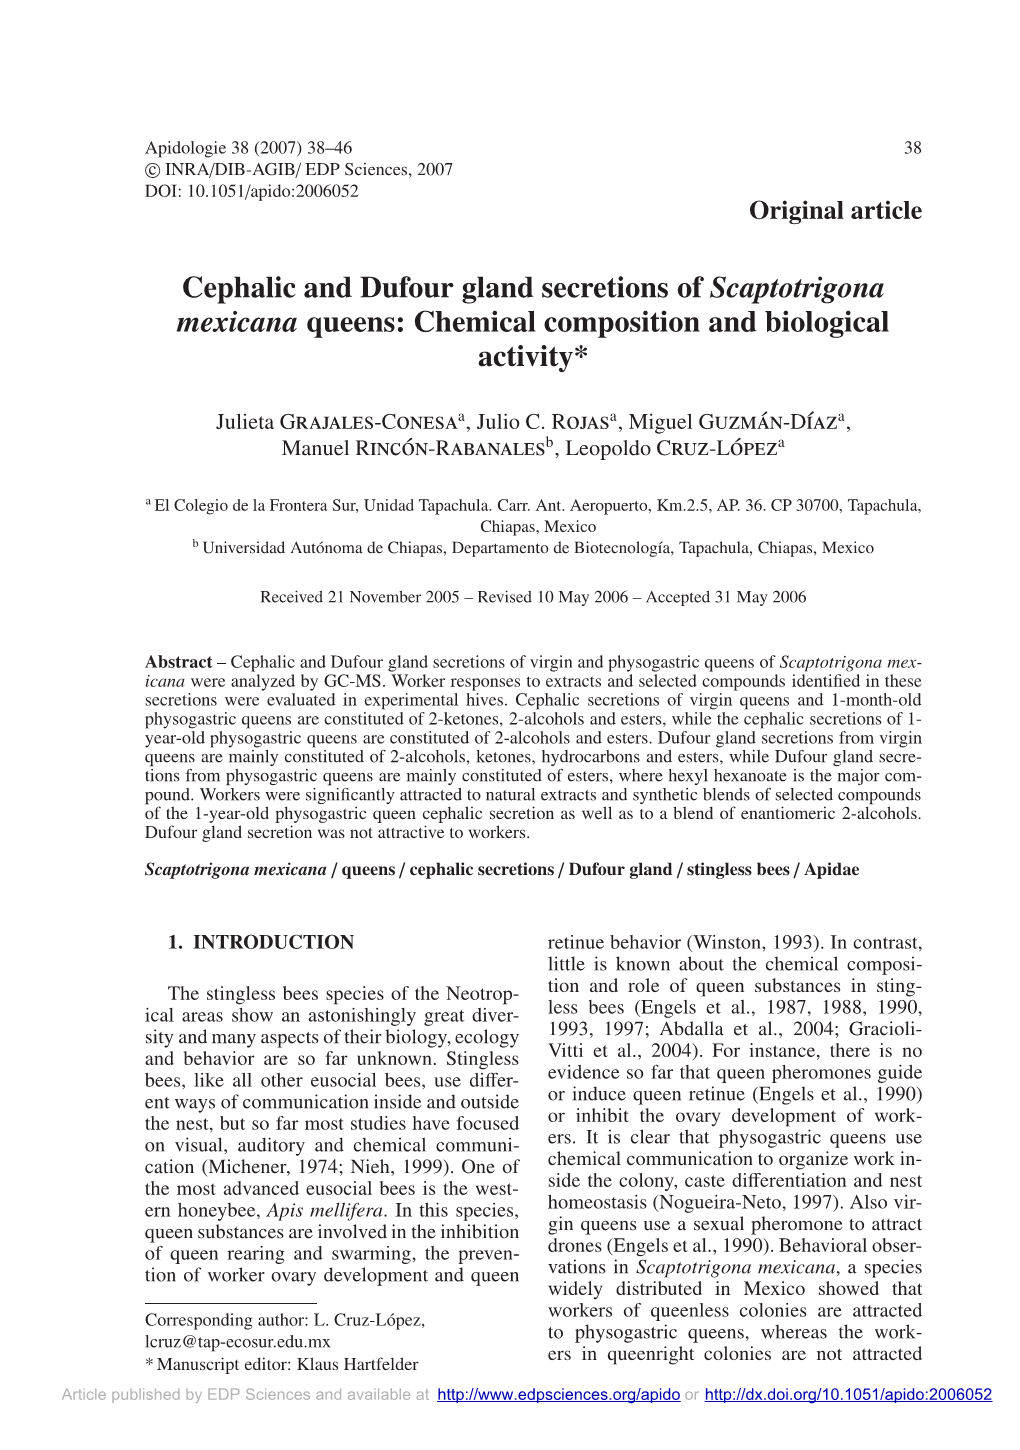 Cephalic and Dufour Gland Secretions of Scaptotrigona Mexicana Queens: Chemical Composition and Biological Activity*